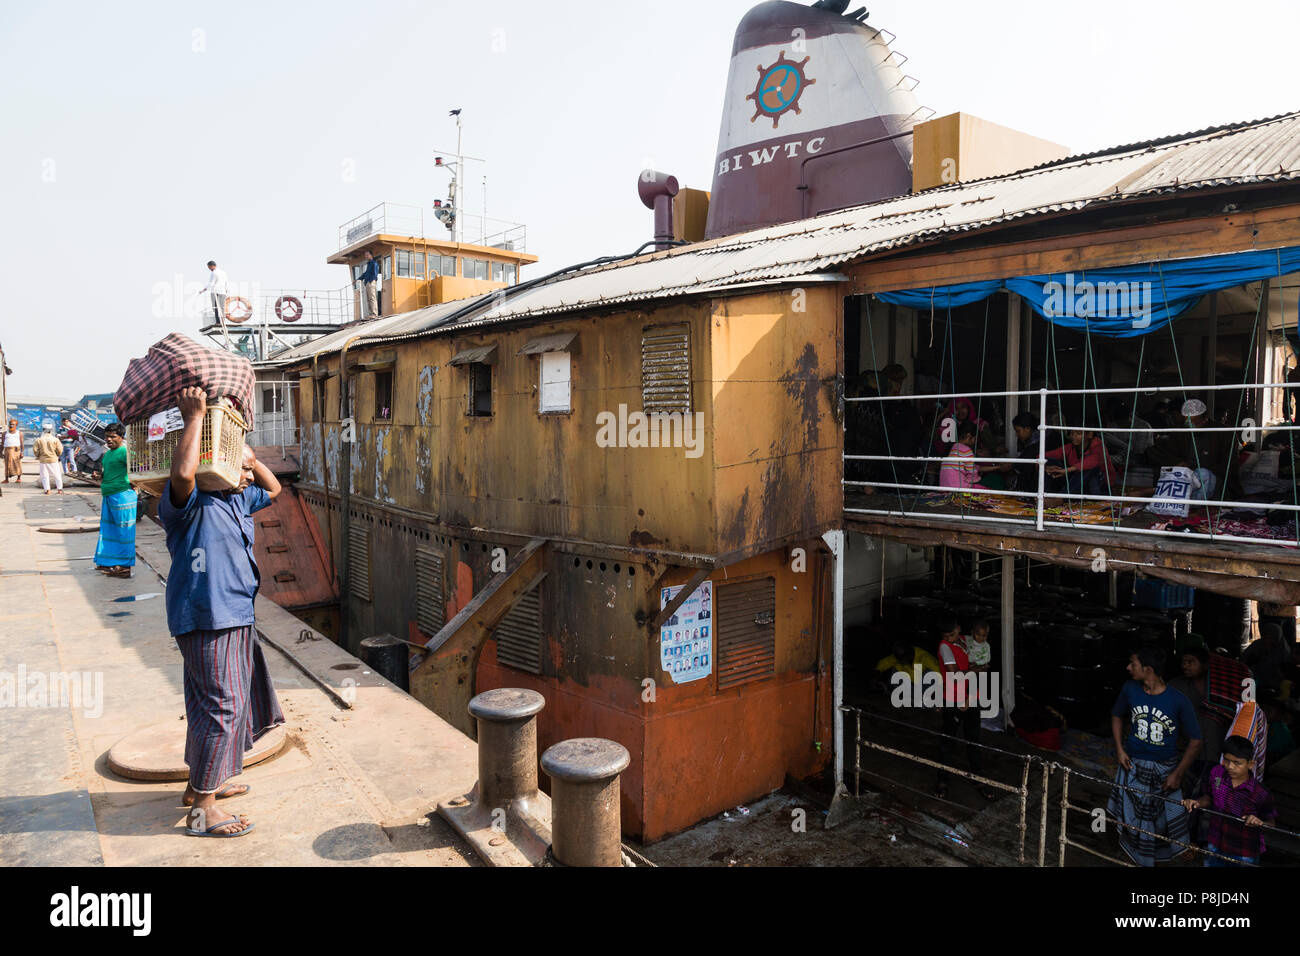 Barisal, Bangladesh, February 27 2017: View of the second and third class of The Rocket - an ancient paddle steamer operating on the rivers of Banglad Stock Photo